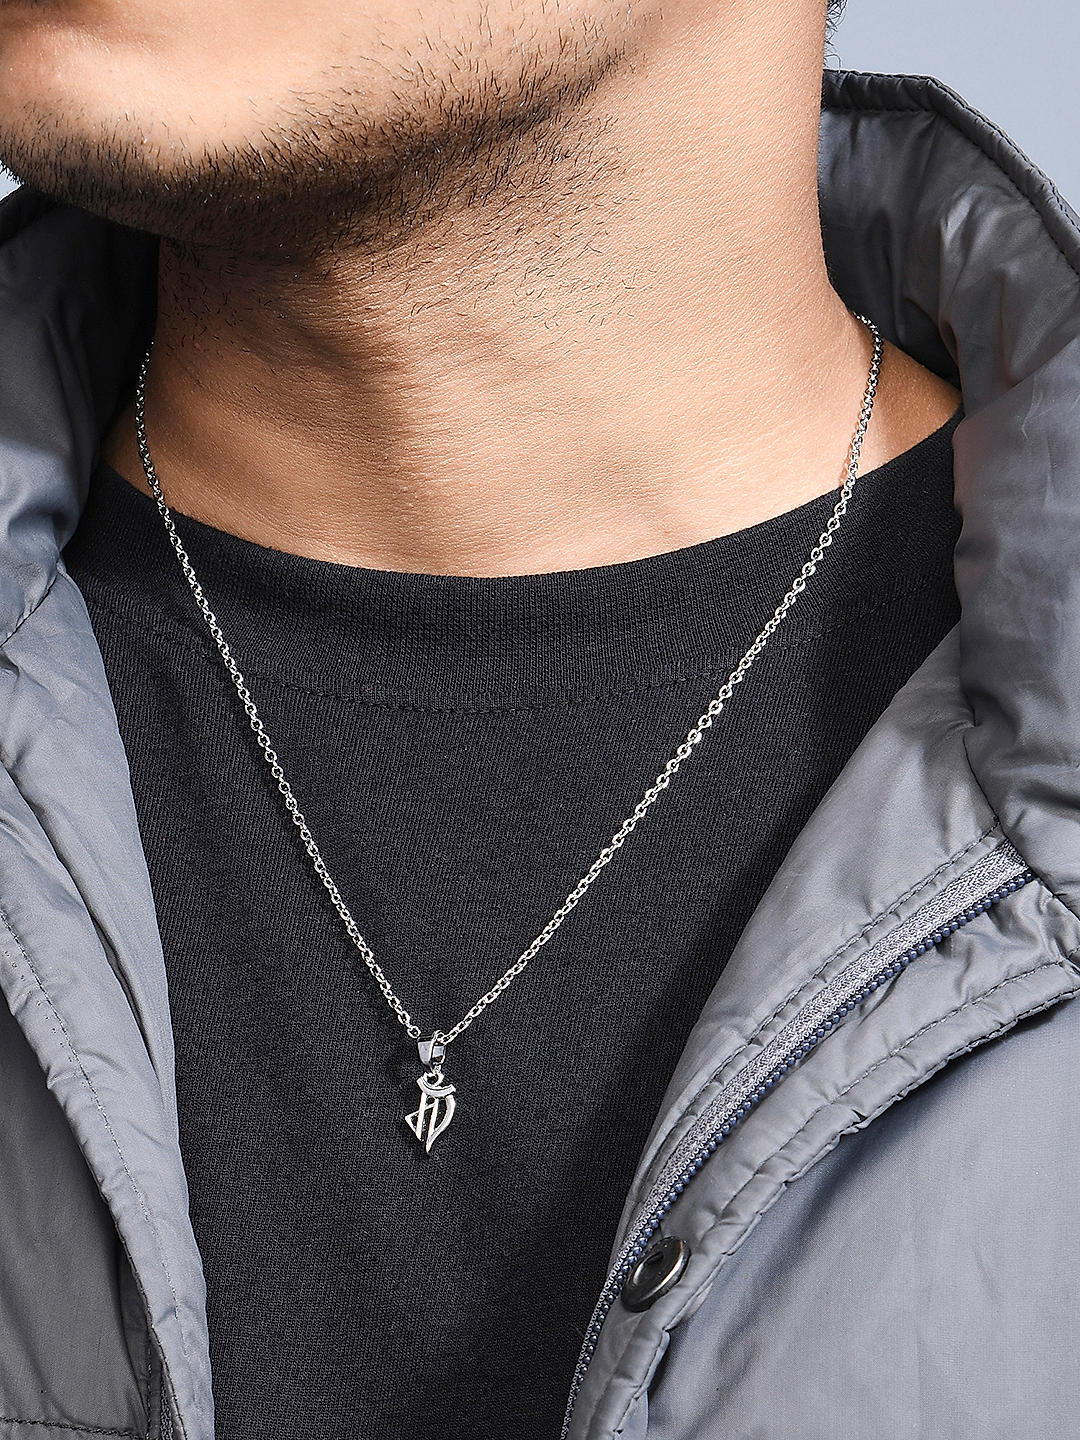 Silver Men Embossed World Map with Compass Pendant Men Necklace » Anitolia